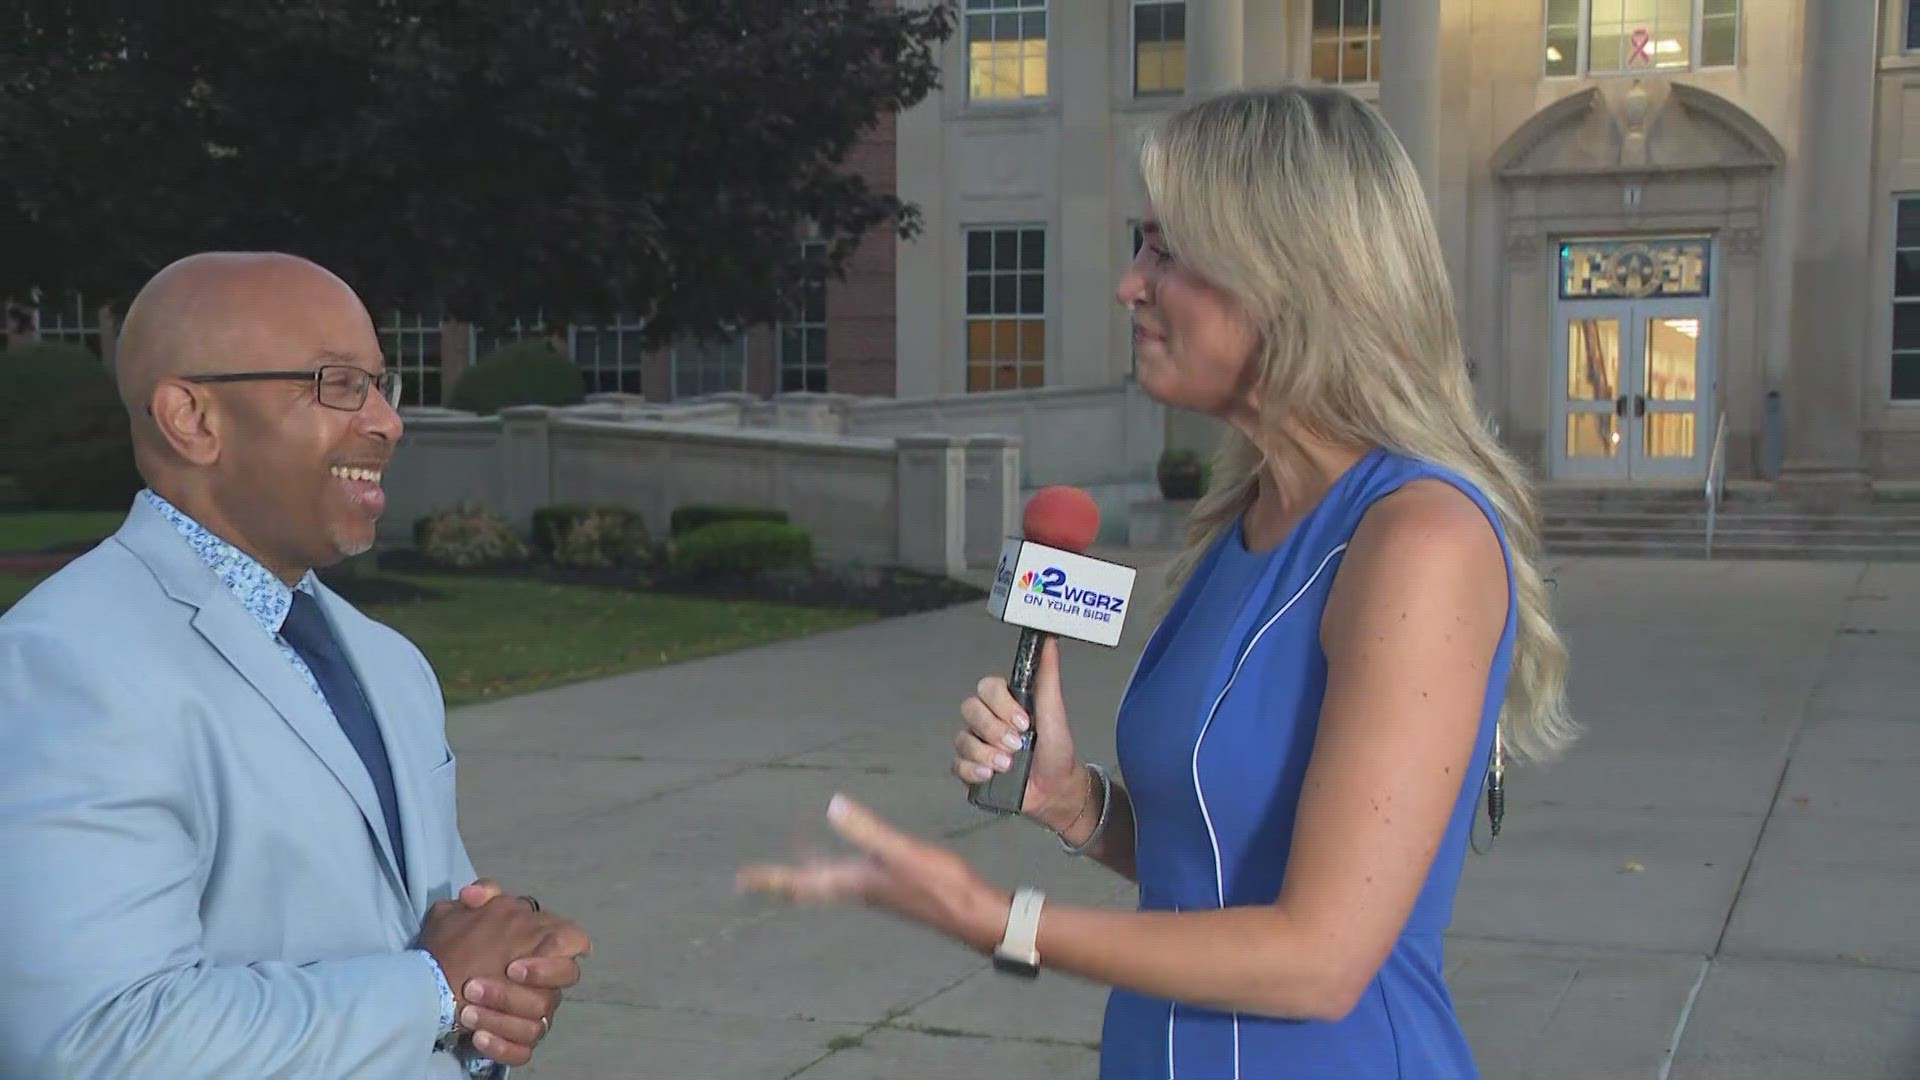 Dr. Brown, the superintendent of the school district, spoke with Daybreak's Lauren Hall ahead of the first day of school.